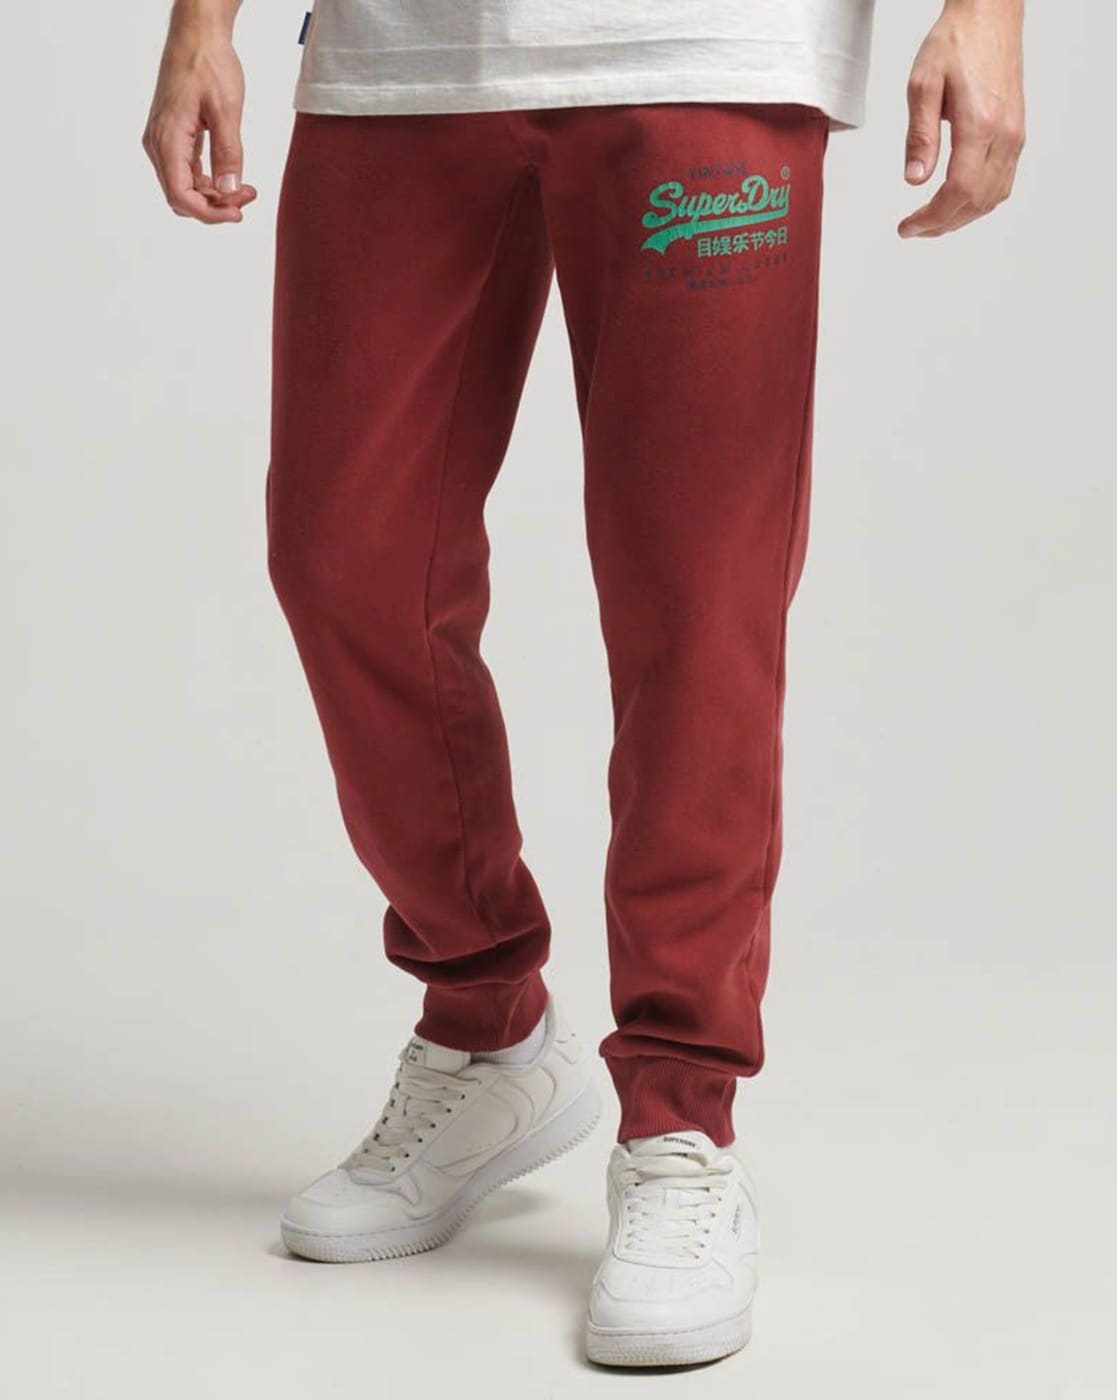 Buy Red Track Pants for Men by SUPERDRY Online